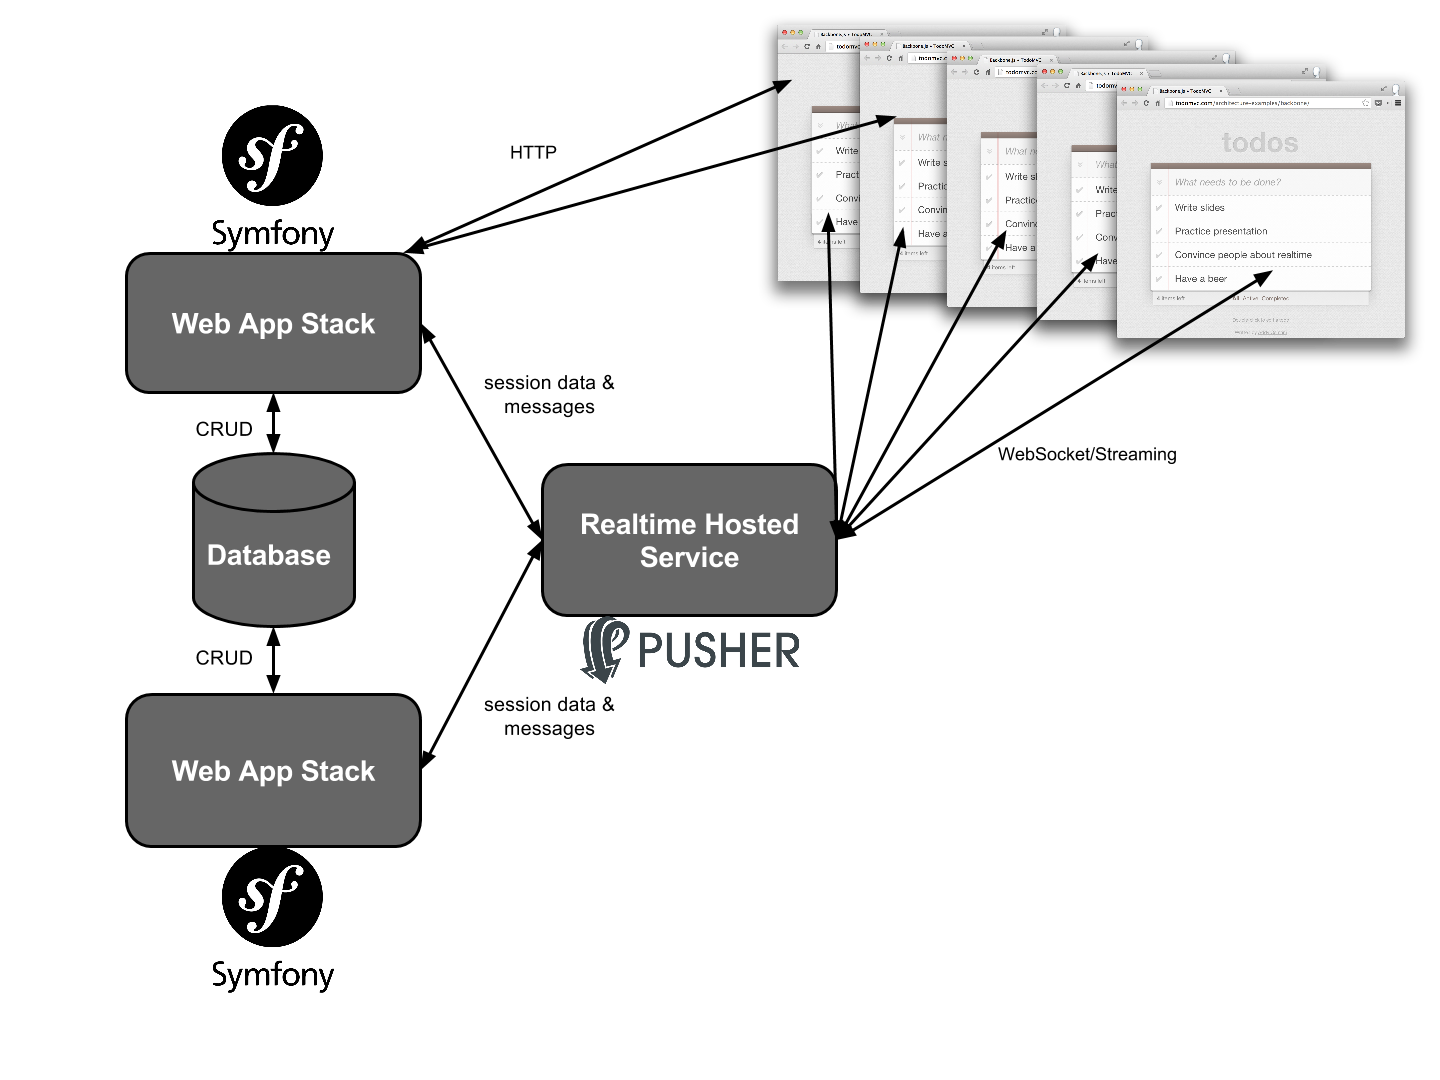 Symfony + Pusher architecture overview